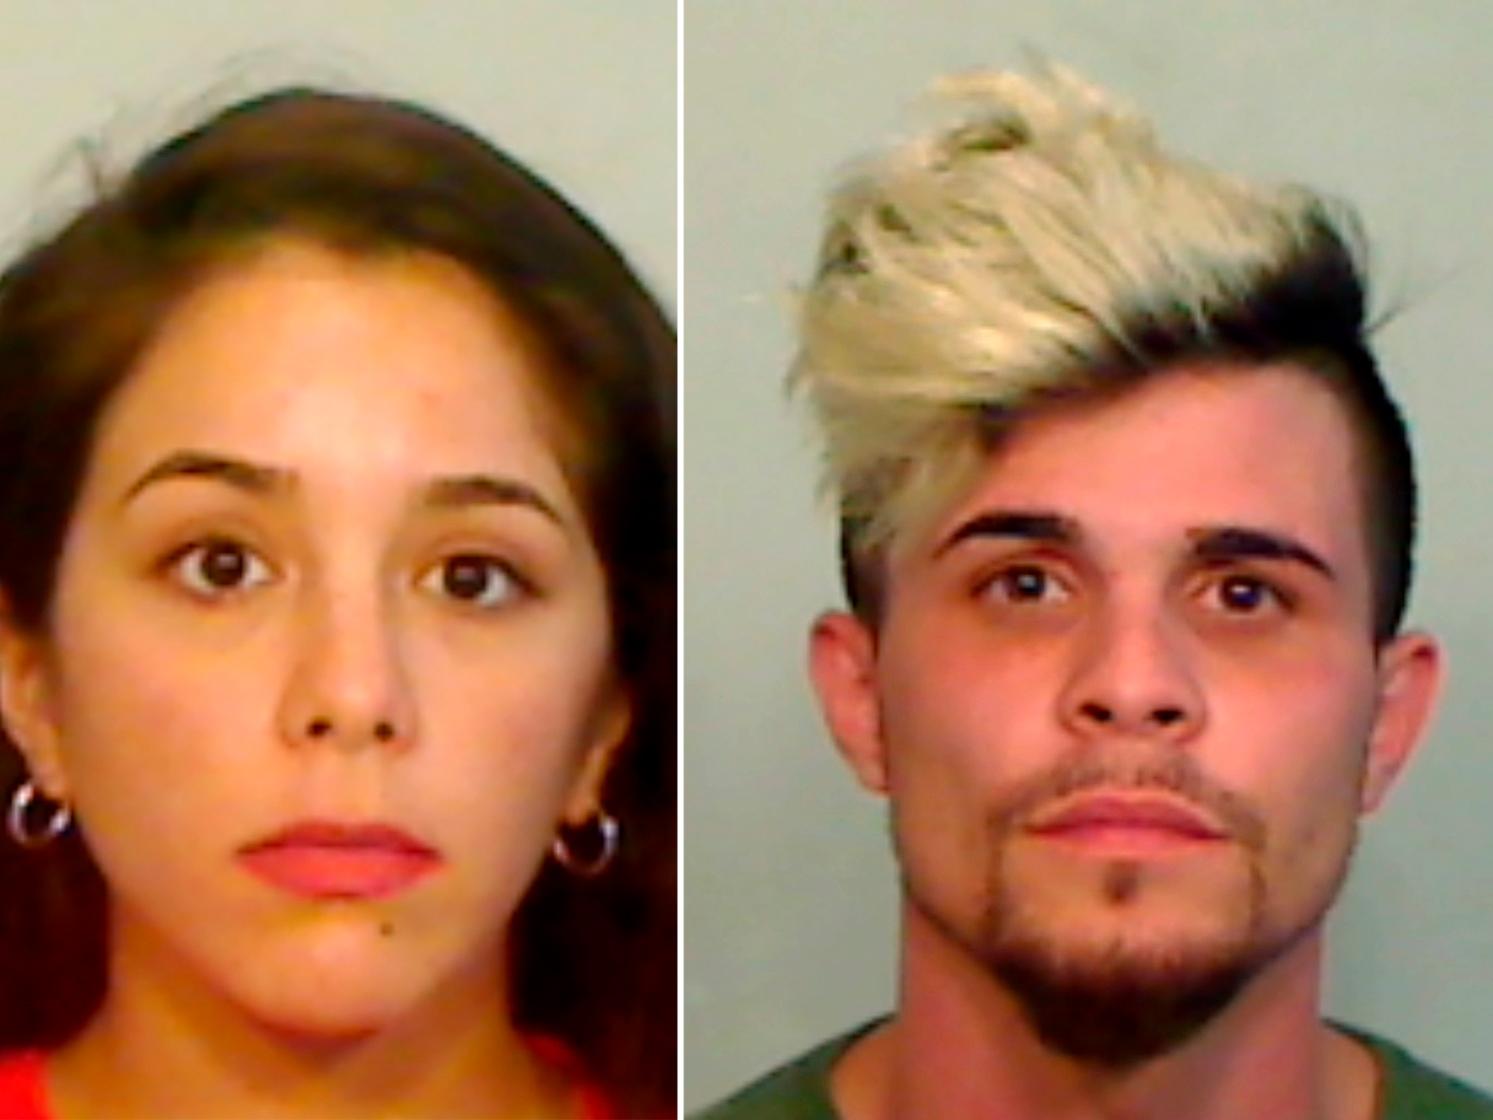 Jose Antonio Freire Interian and his partner Yohana Anahi Gonzalez were arrested on Thursday, 19 July in the Florida Keys after authorities said they violated quarantine rules